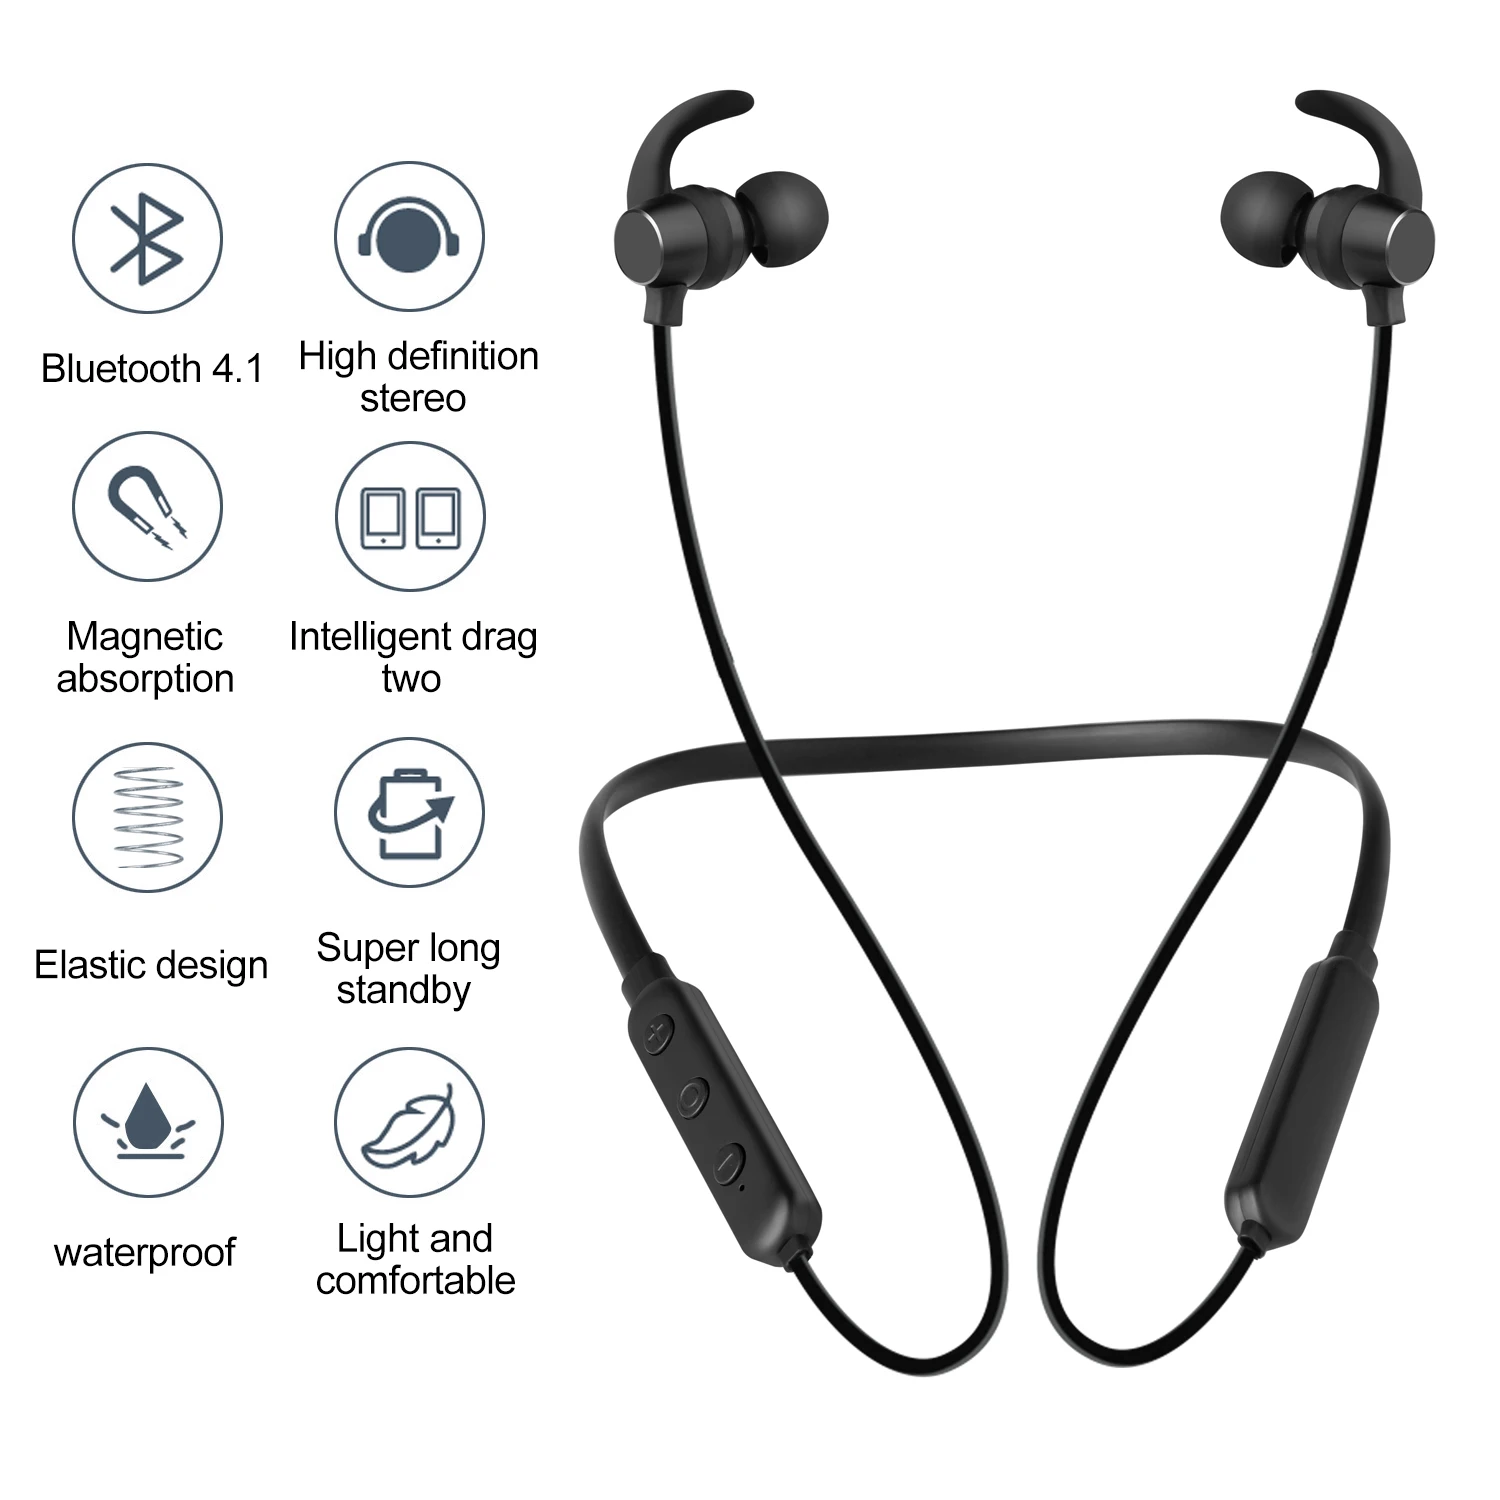 Magnetic Neckband Wireless 4.1 Bluetooth Earphones X7, Stereo Wireless Headphones with Noise Cancelling 8 Hour Battery